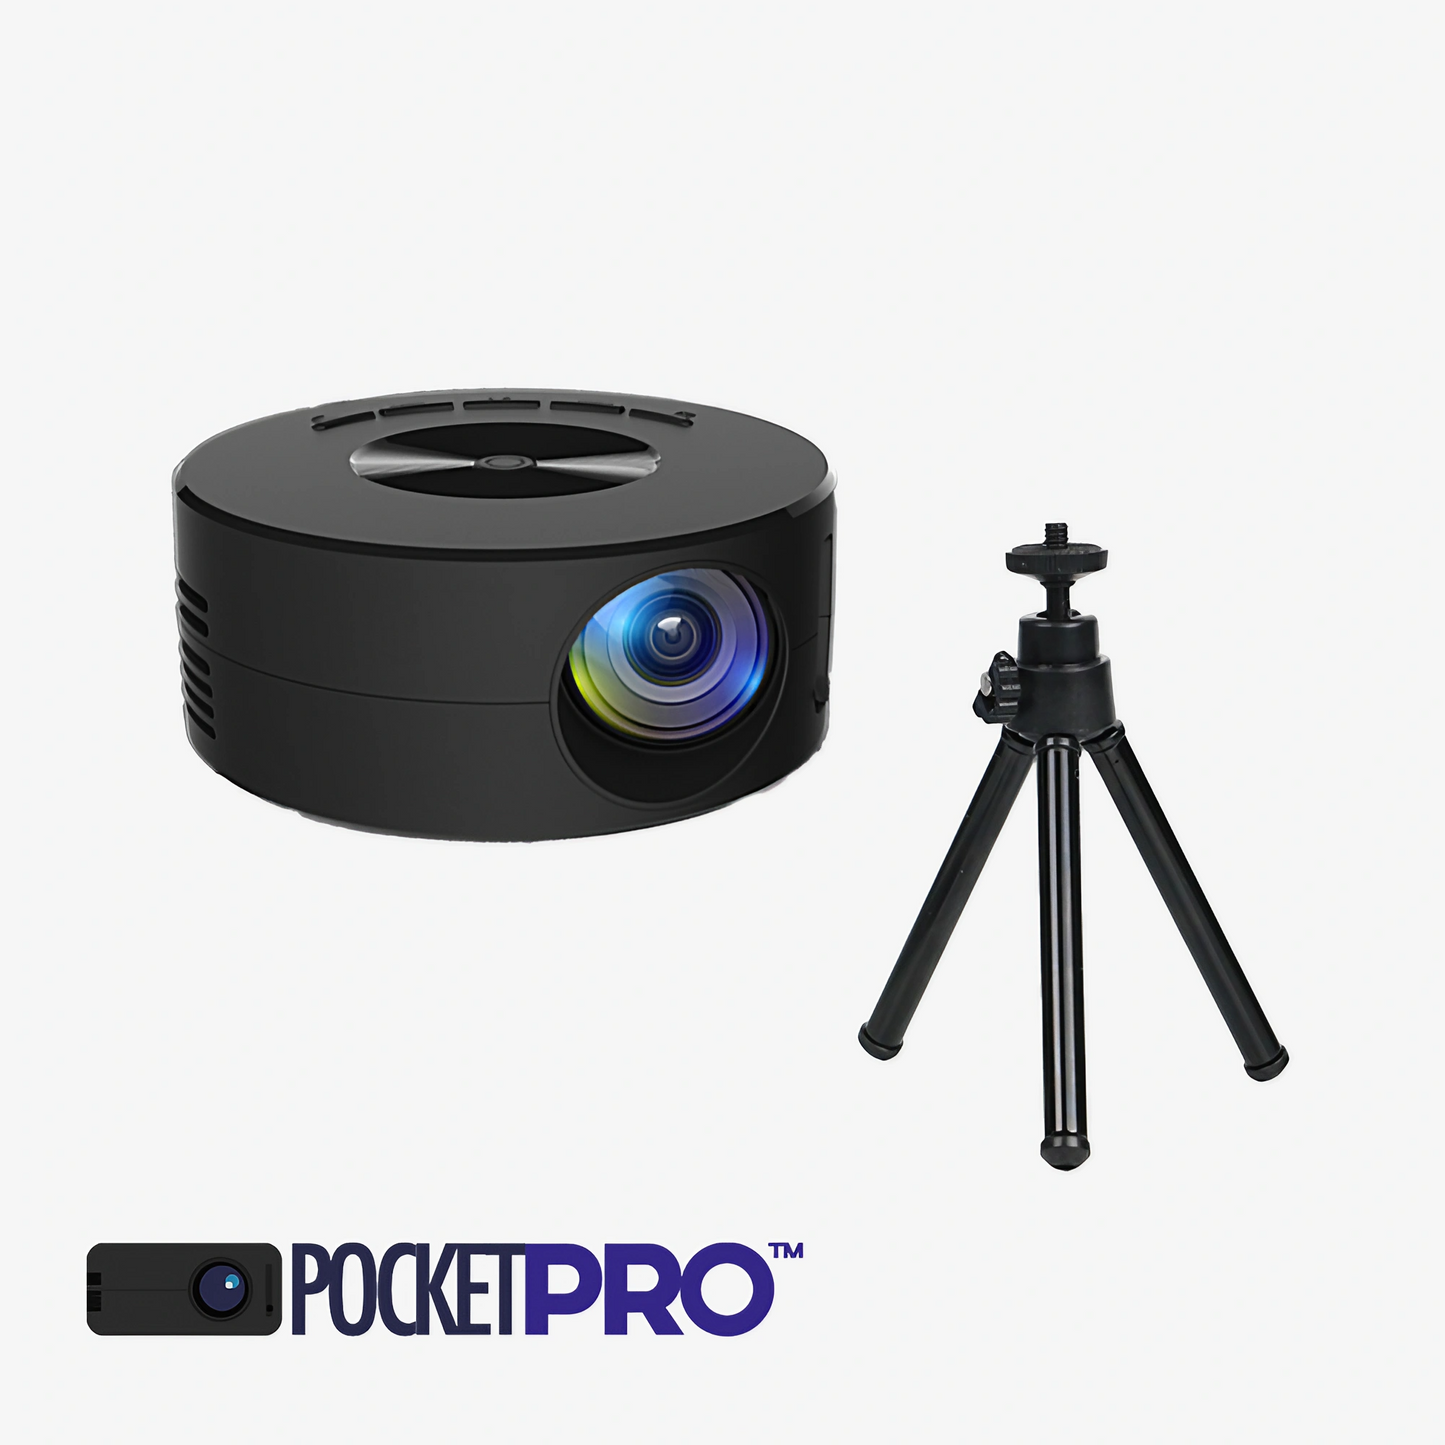 The PocketPro's™ adjustable stand allows you to position the projector at the perfect angle for an optimal viewing experience.